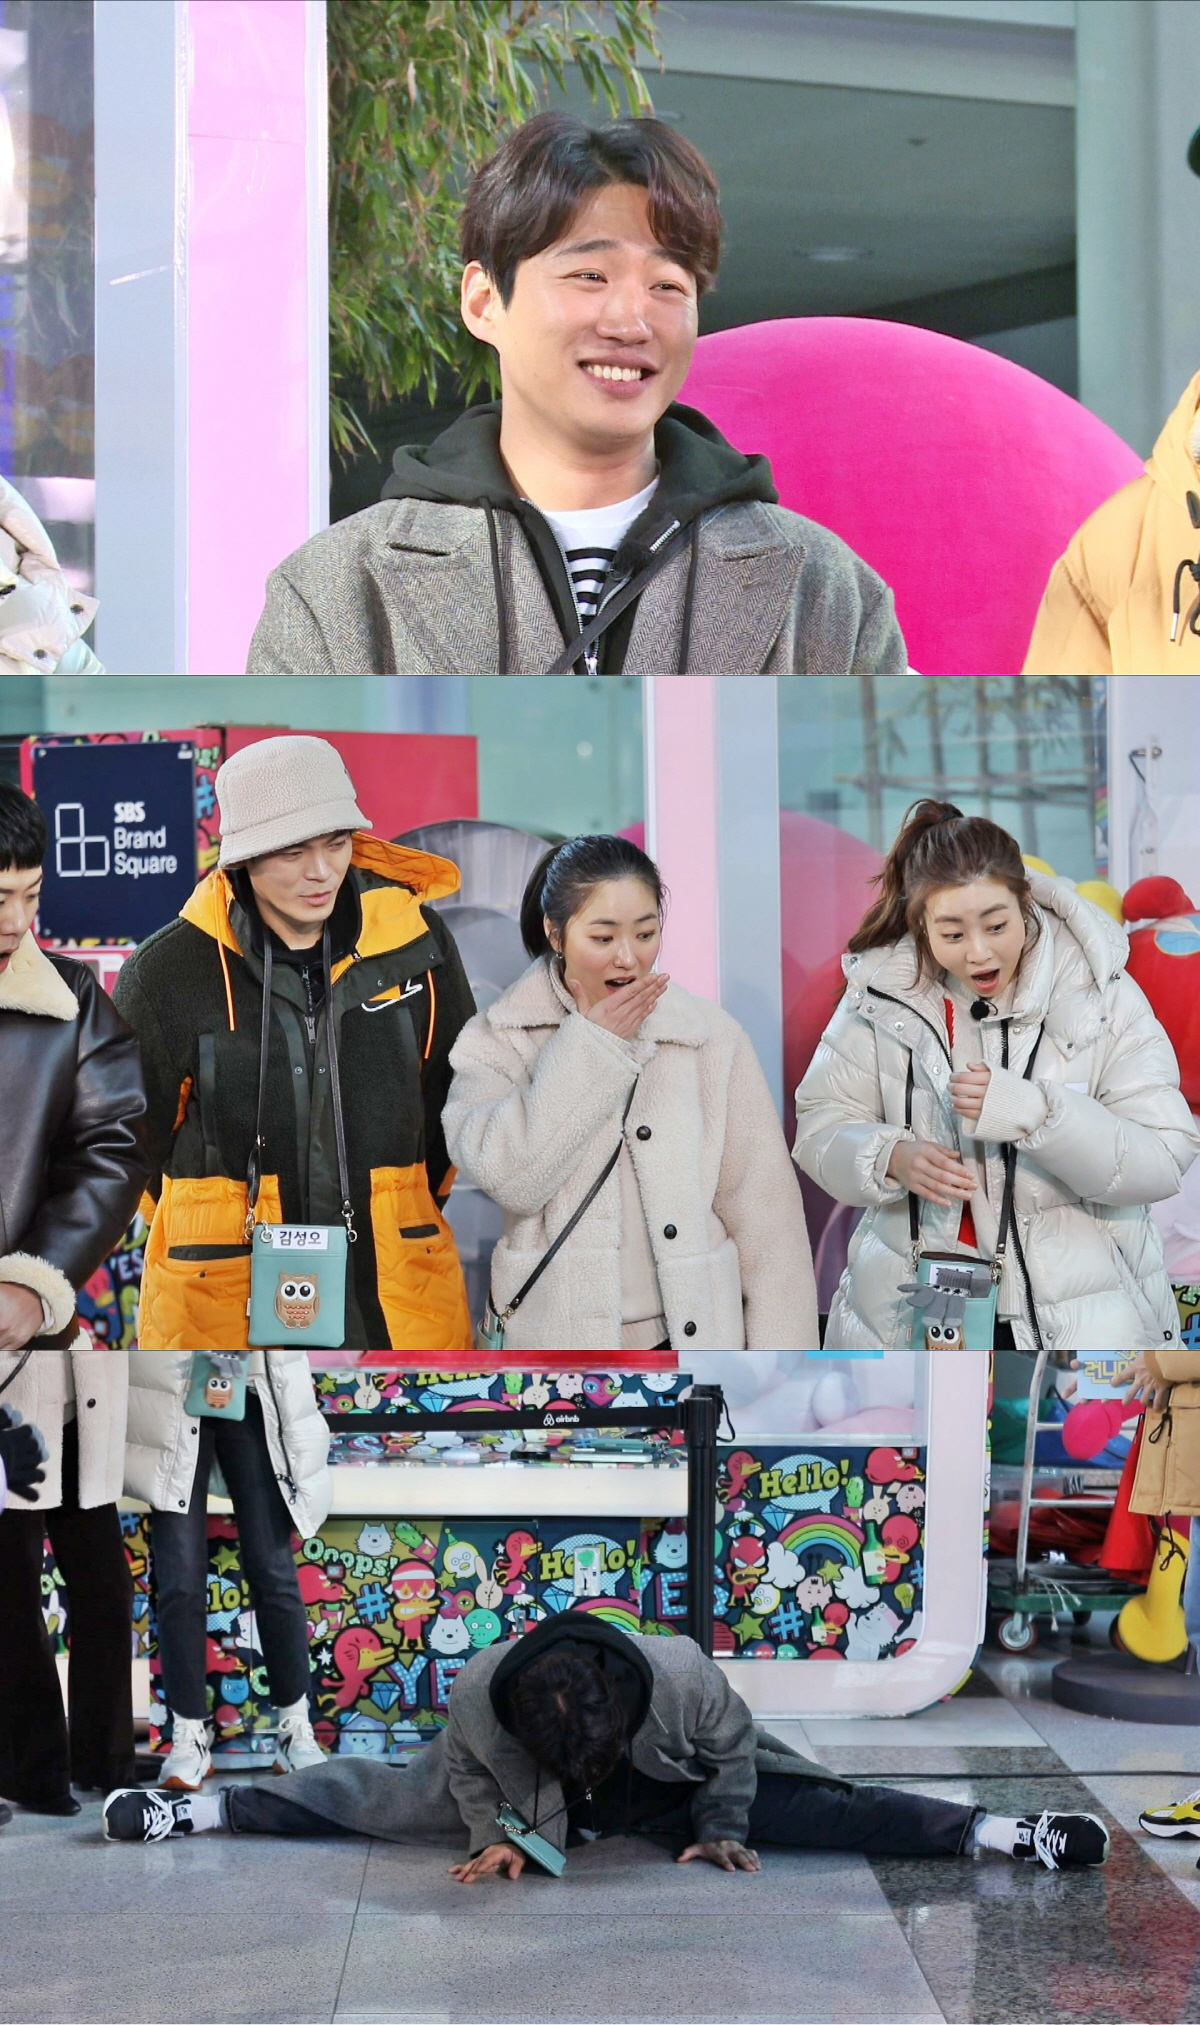 On SBS Running Man, which is broadcasted 12 (day), entertainment Odintsovo Ahn Jae-hong will reveal the killing.Ahn Jae-hong said through Interview after the recent Running Man recording, Everything really did.It was really life entertainment, and it was a strange and fun experience. As I felt, Ahn Jae-hong was soaked in the charm of Running Man that he recorded, and his passion was not unusual from the opening.The members told Ahn Jae-hong: I was told there was an individual period that men could not easily do.I can show you that you are good at tearing leg. Ahn Jae-hong said, I am confident that I am flexible because I have been swimming for a long time.However, Ahn Jae-hong laughed with pure troubles such as entertainment Odintsovo, saying, I am worried about tearing Leg to the side or tearing it in the future.Ahn Jae-hong showed off the wrong charm in the following missions and races, and the crew said, Where are you?, but perfectly adapted to the lace that was deceived and deceived by the natural virtuous expression and tone that I could not understand.The Running Man adaptation and limited personal period of Live EntertainmentOdintsovo Ahn Jae-hong can be found on Running Man which is broadcasted at 5 pm on Sunday, 12th.